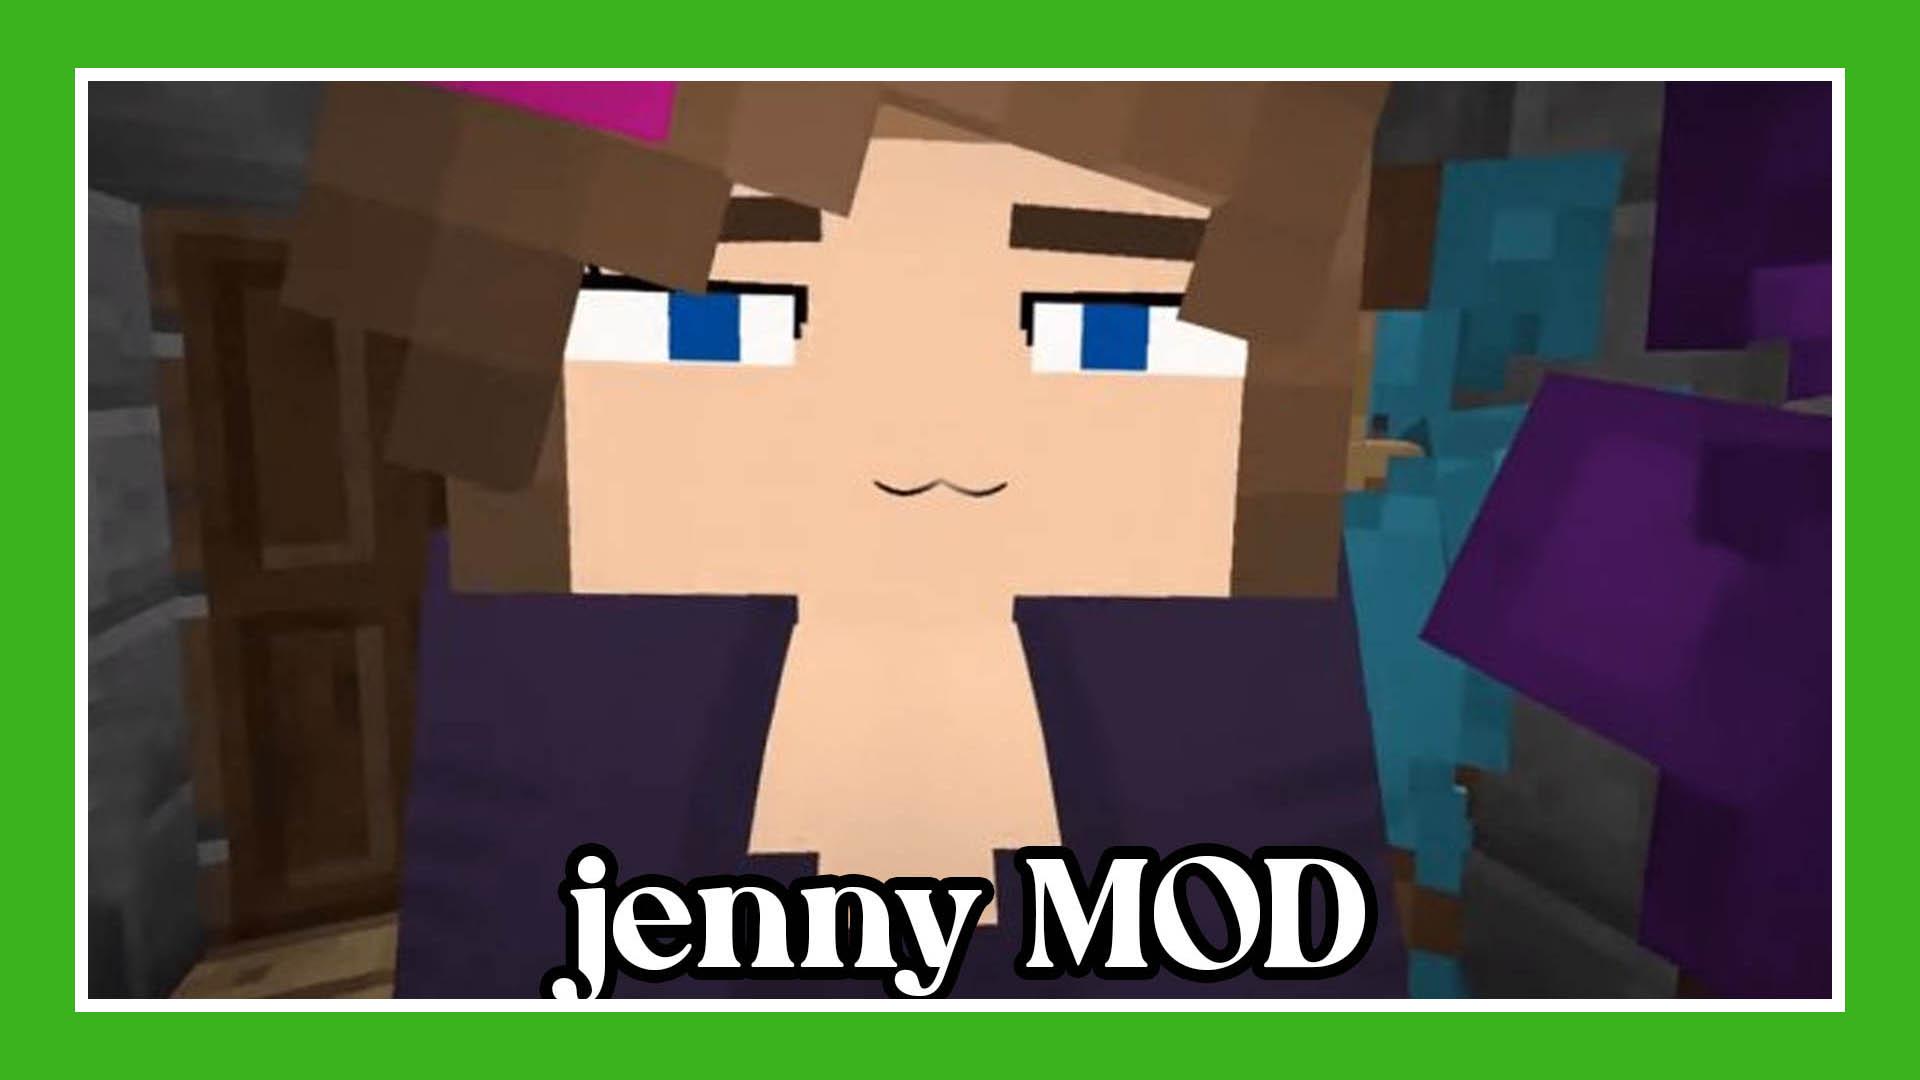 Jenny mod for minecraft mods. Мод Дженни 12 2 2. Дженни мод на 1.16.5. Jenny Mod 1 12. Дженни мод 1.12.2.